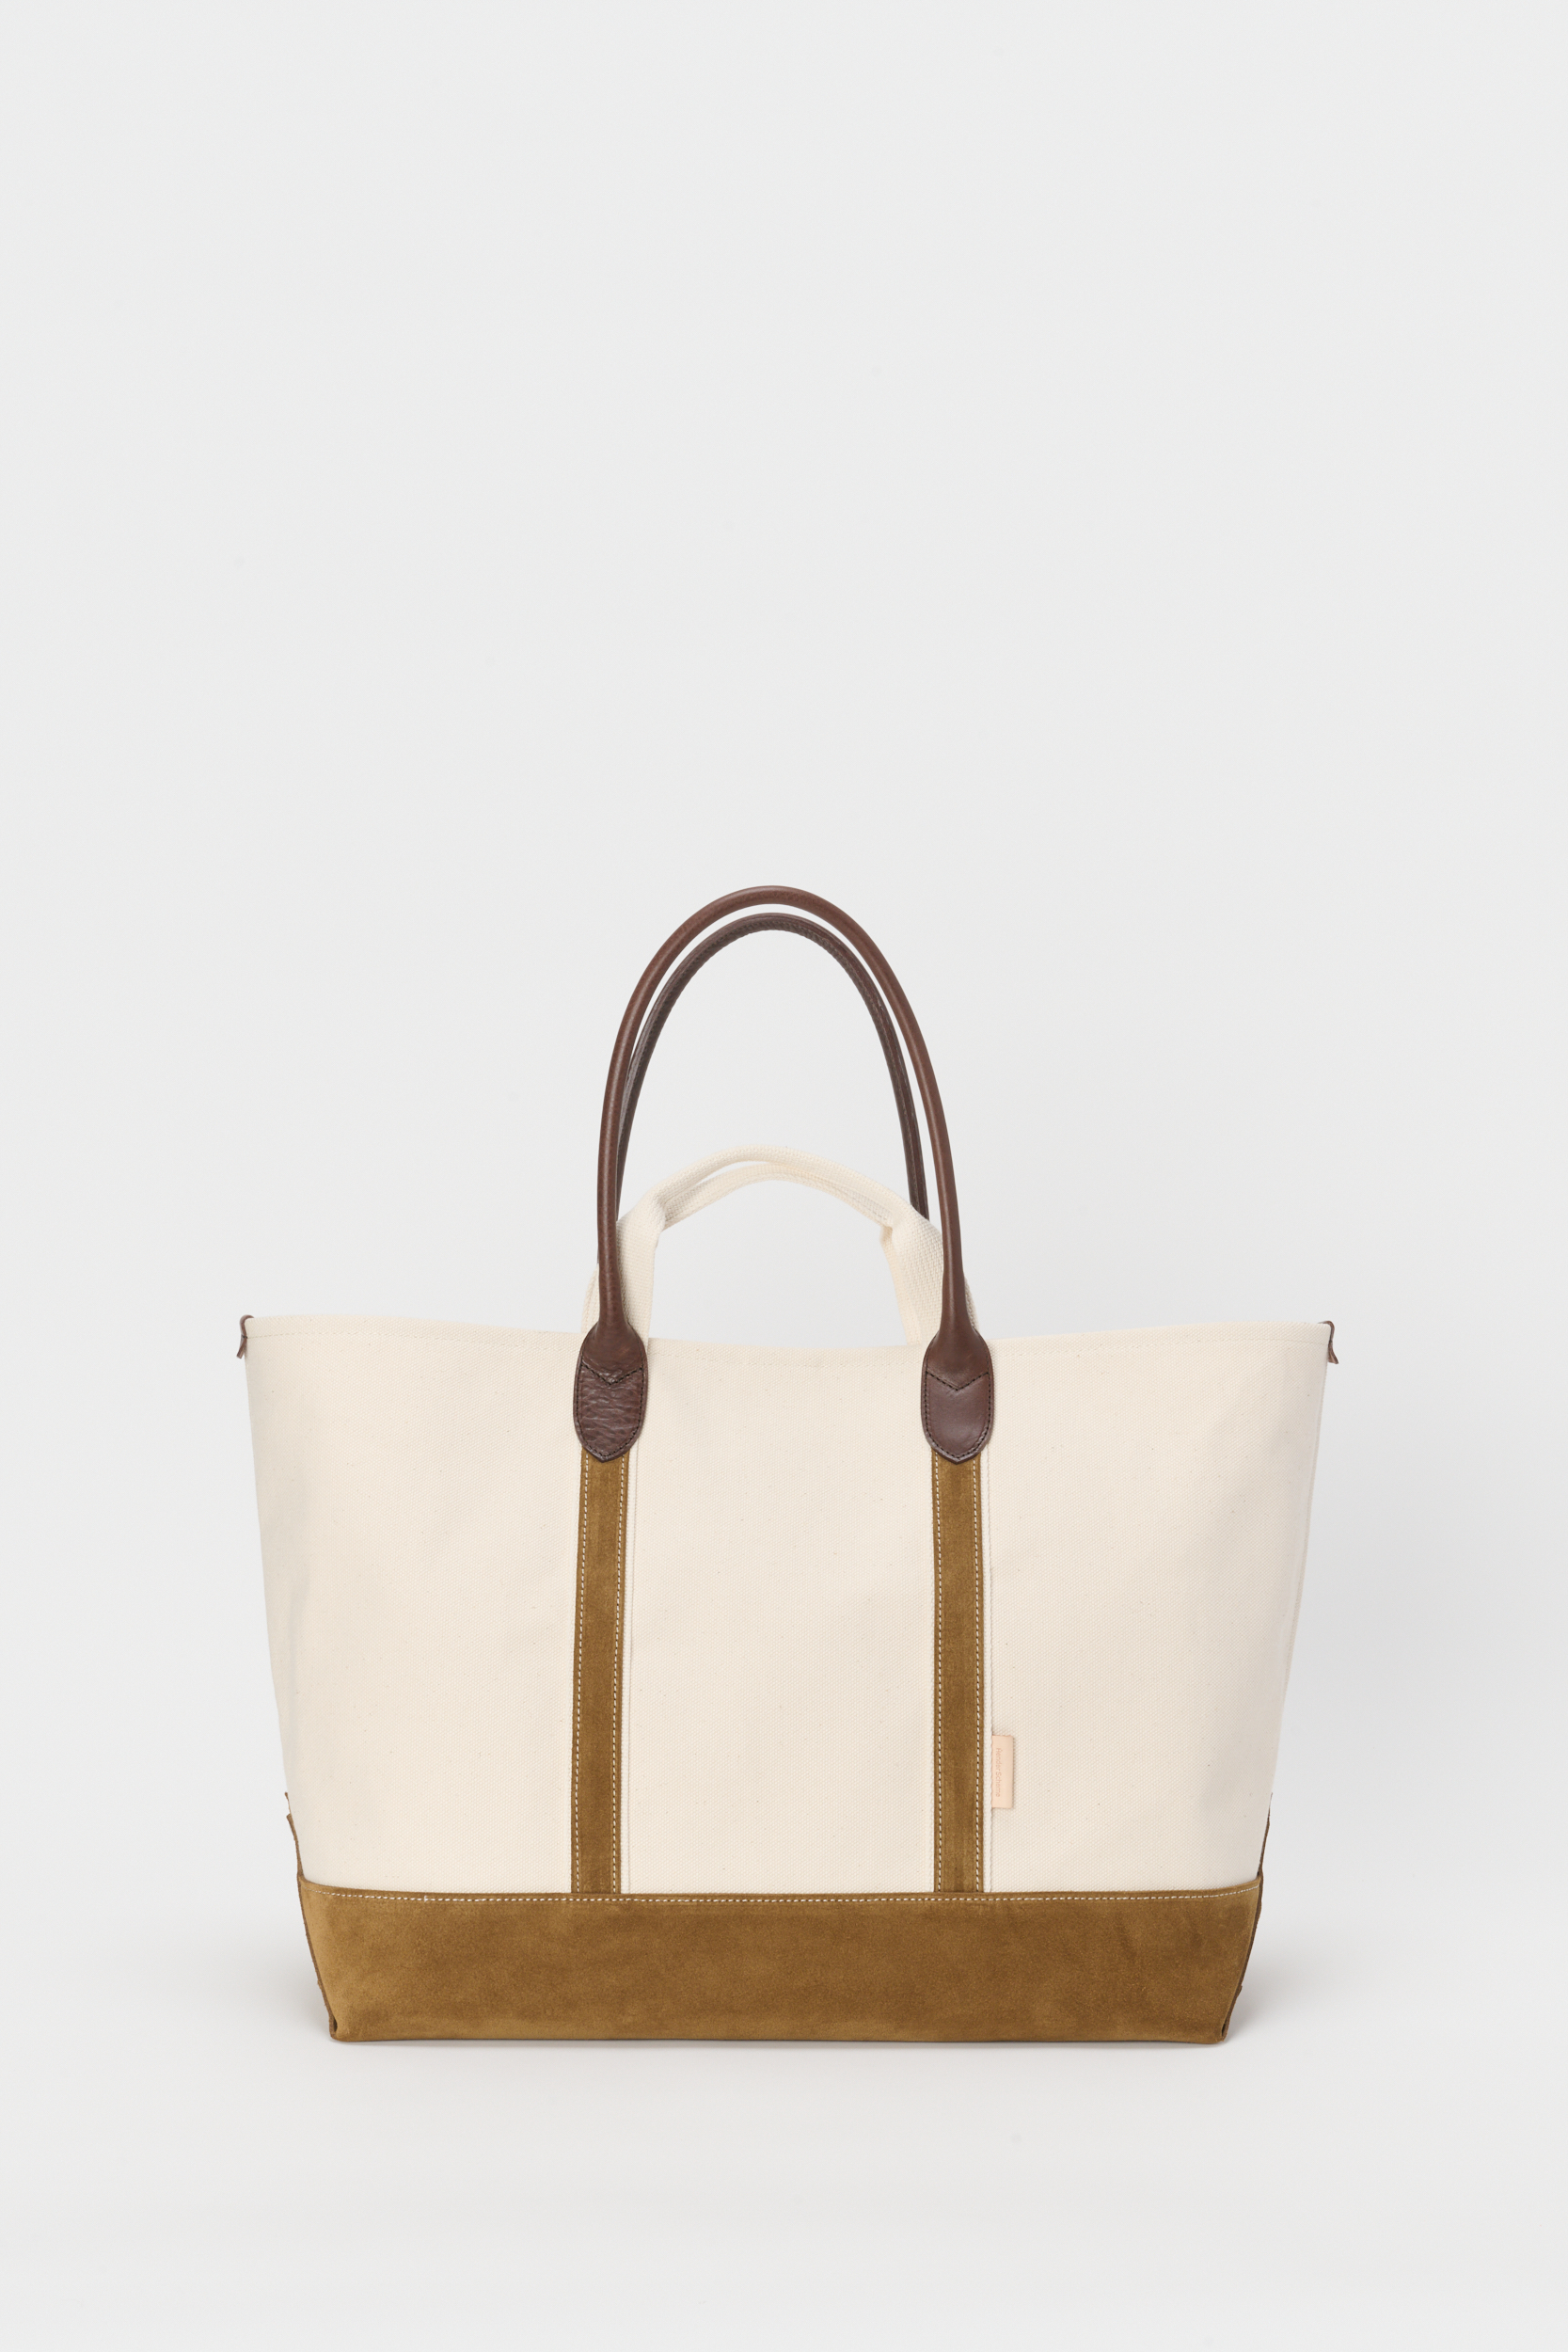 Hender Scheme campus suede handle tote L_camel エンダースキーマ トートバッグ 正規取扱店 公式通販 送料無料